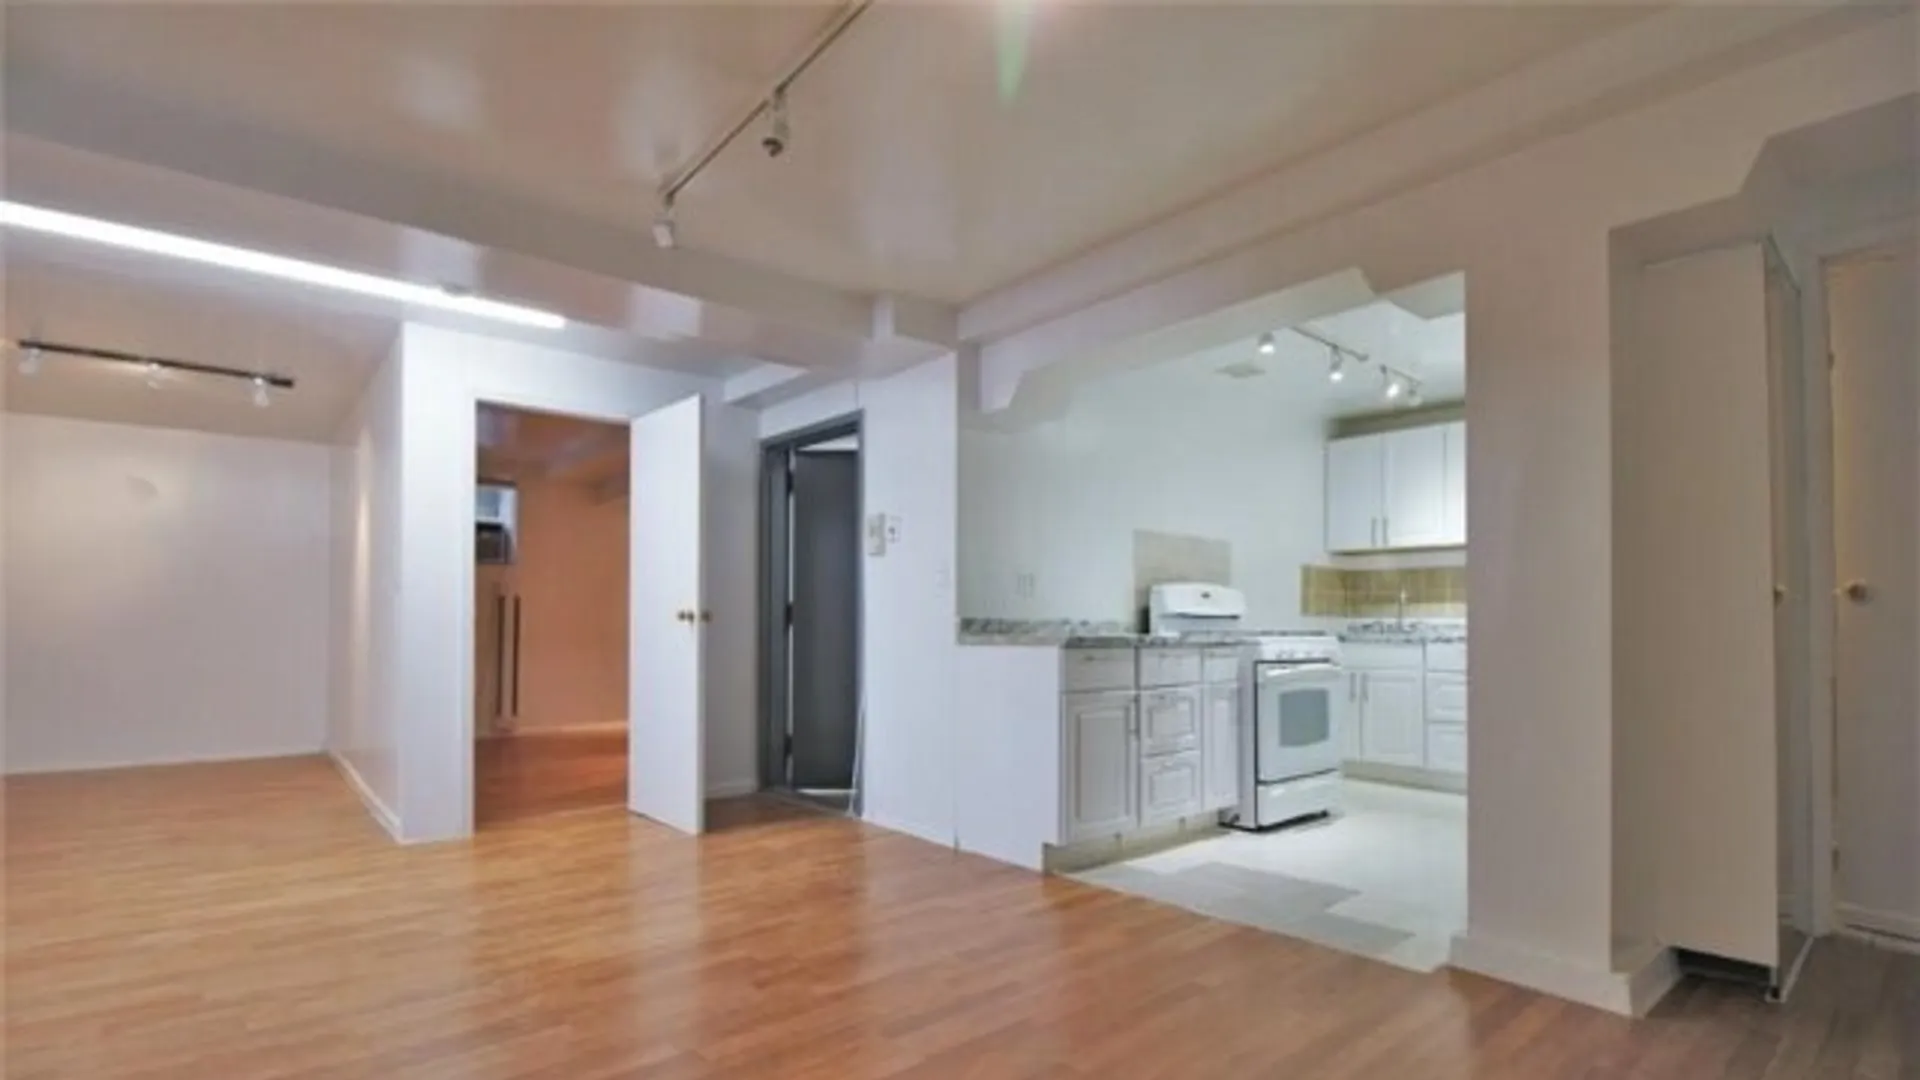 The Woods, 48 South 4th Street, New York, NY 11211, USA | 1 bed house for rent